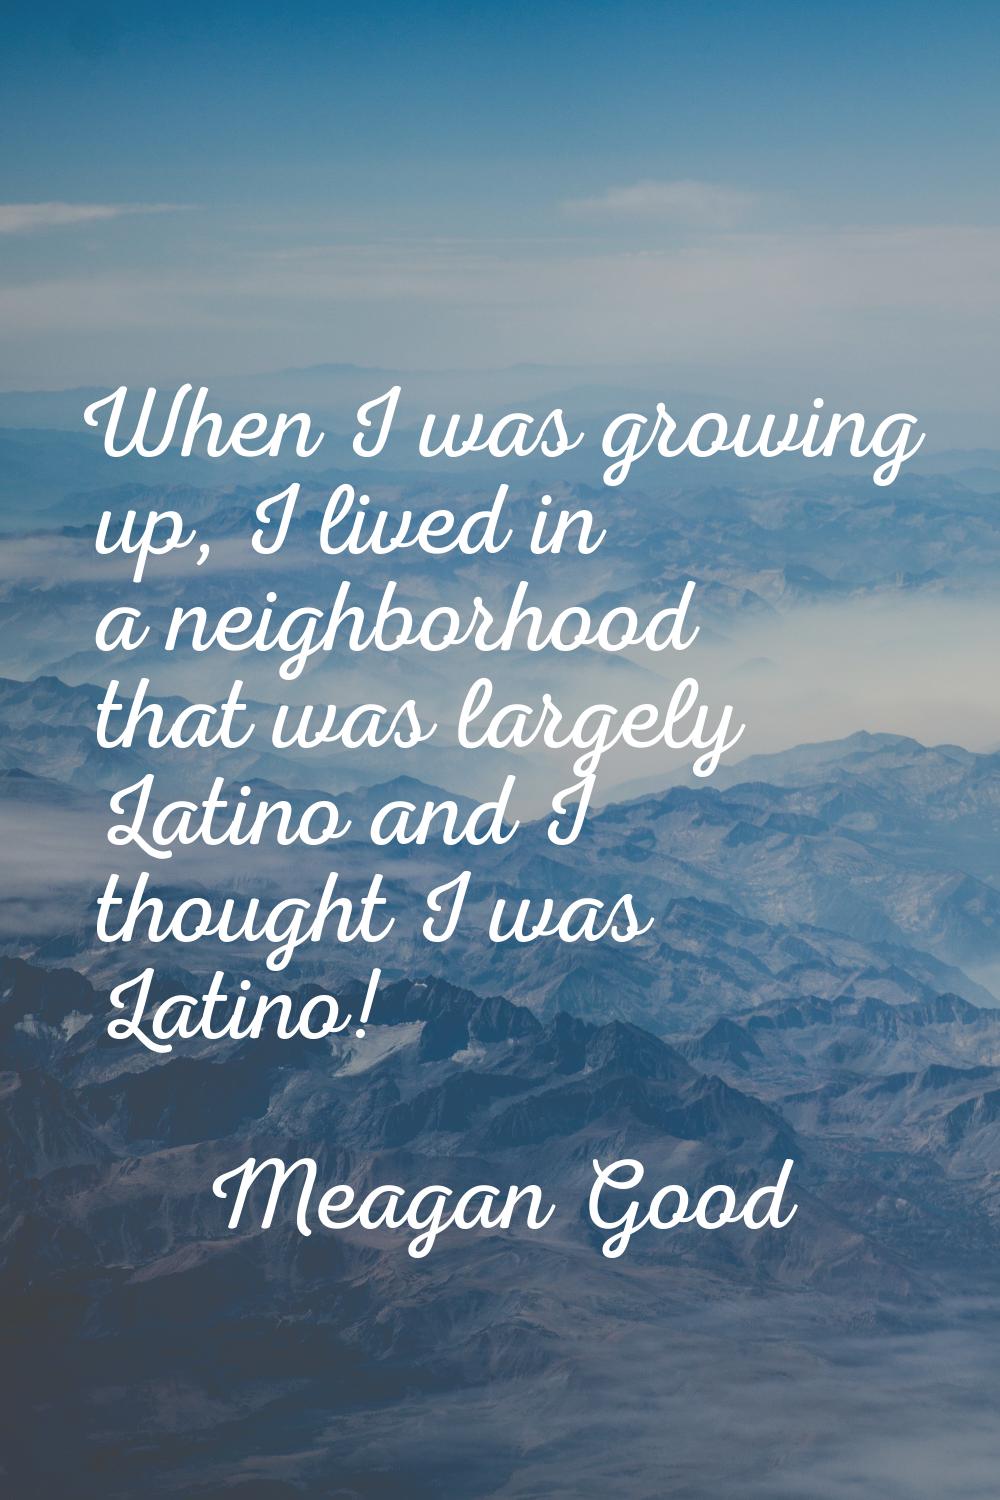 When I was growing up, I lived in a neighborhood that was largely Latino and I thought I was Latino